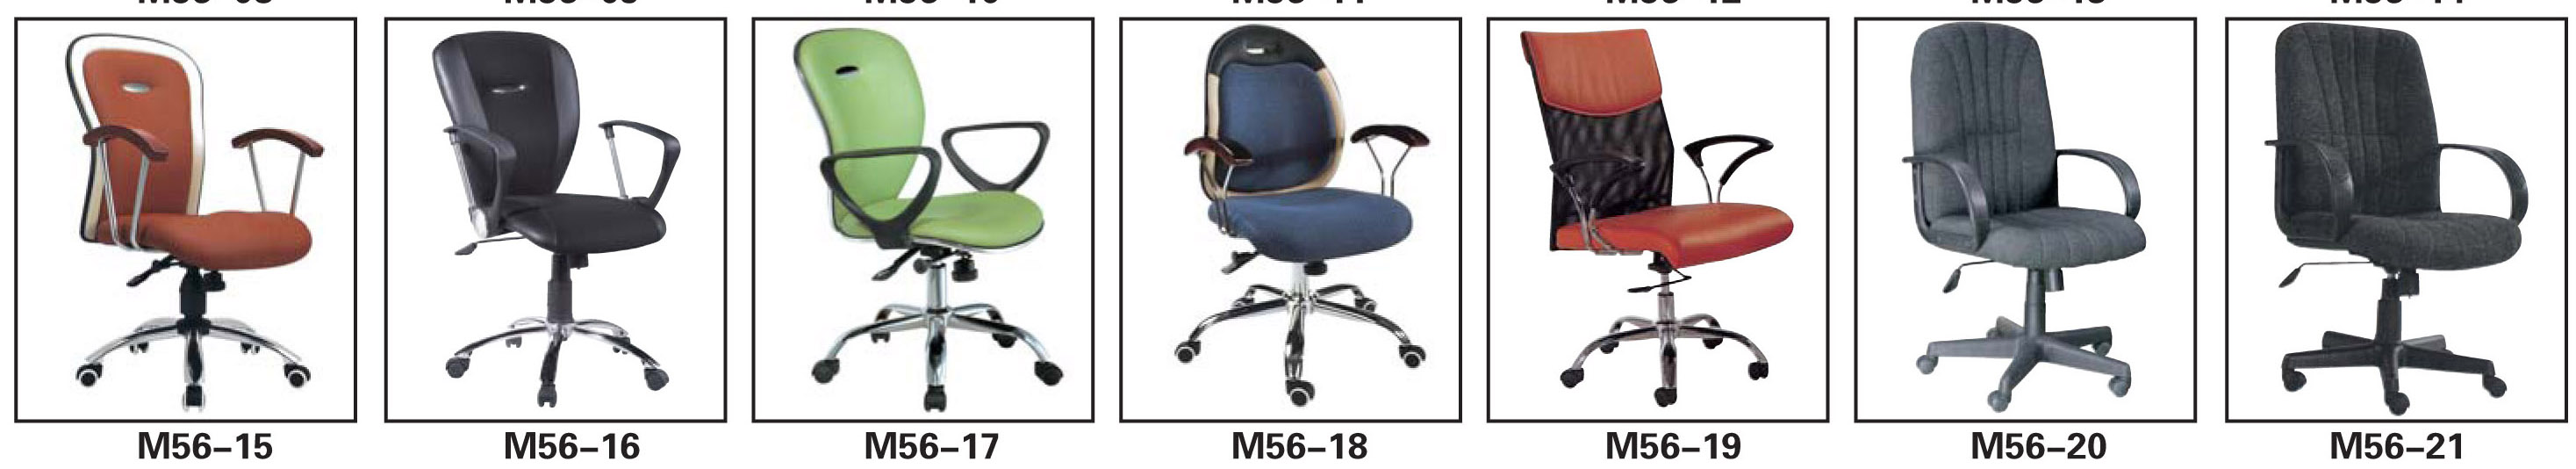 offic chair,Office chairs